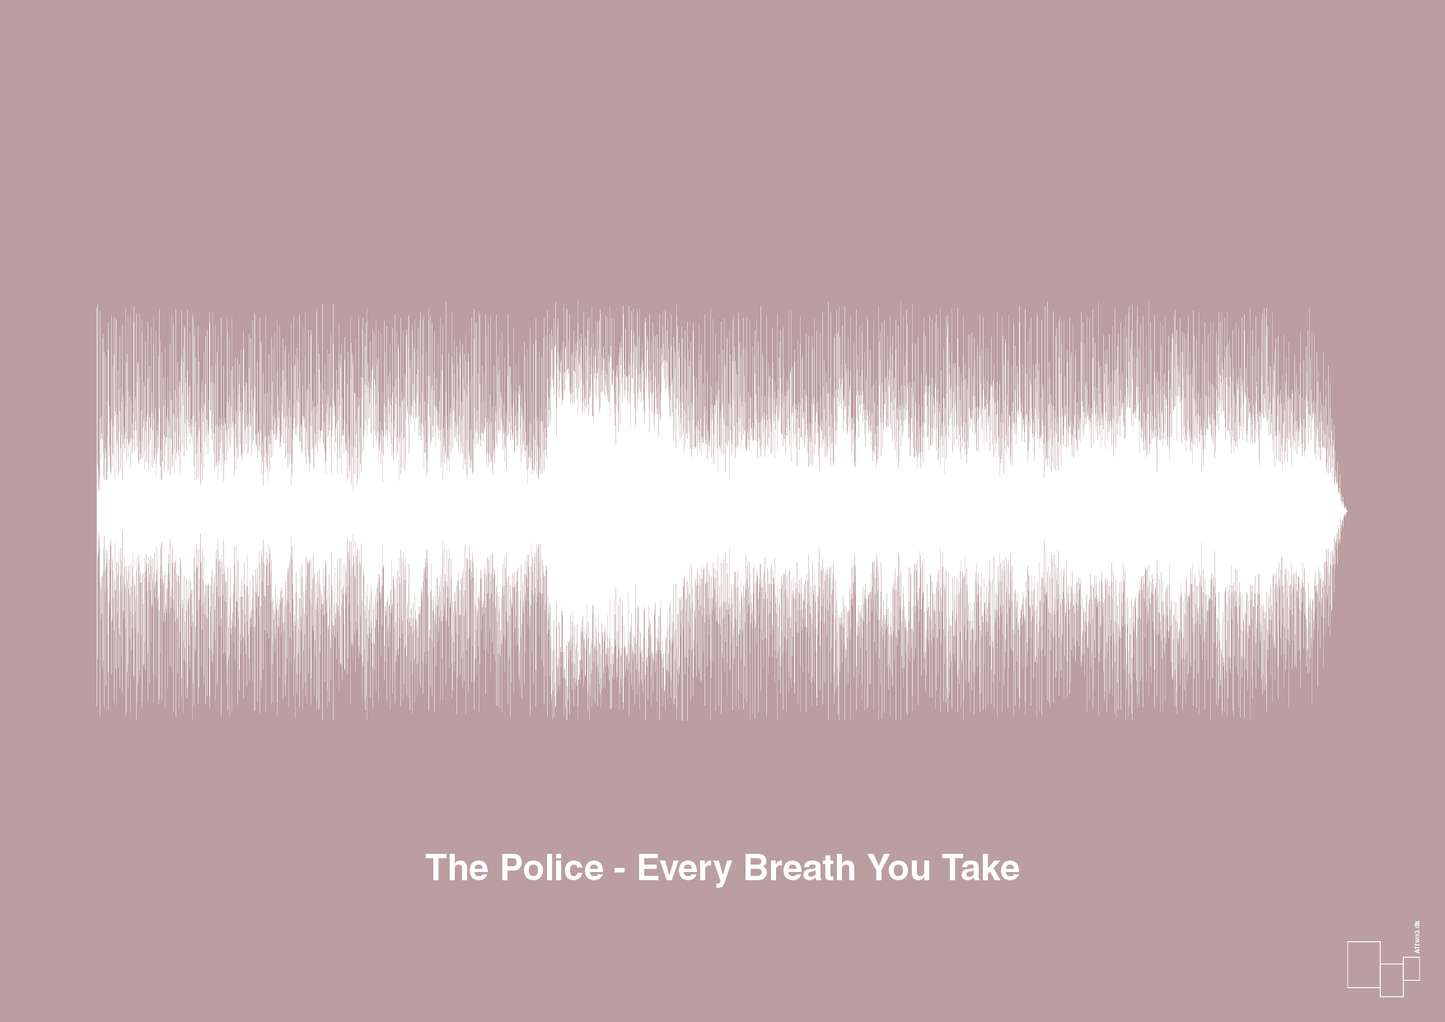 the police - every breath you take - Plakat med Musik i Light Rose